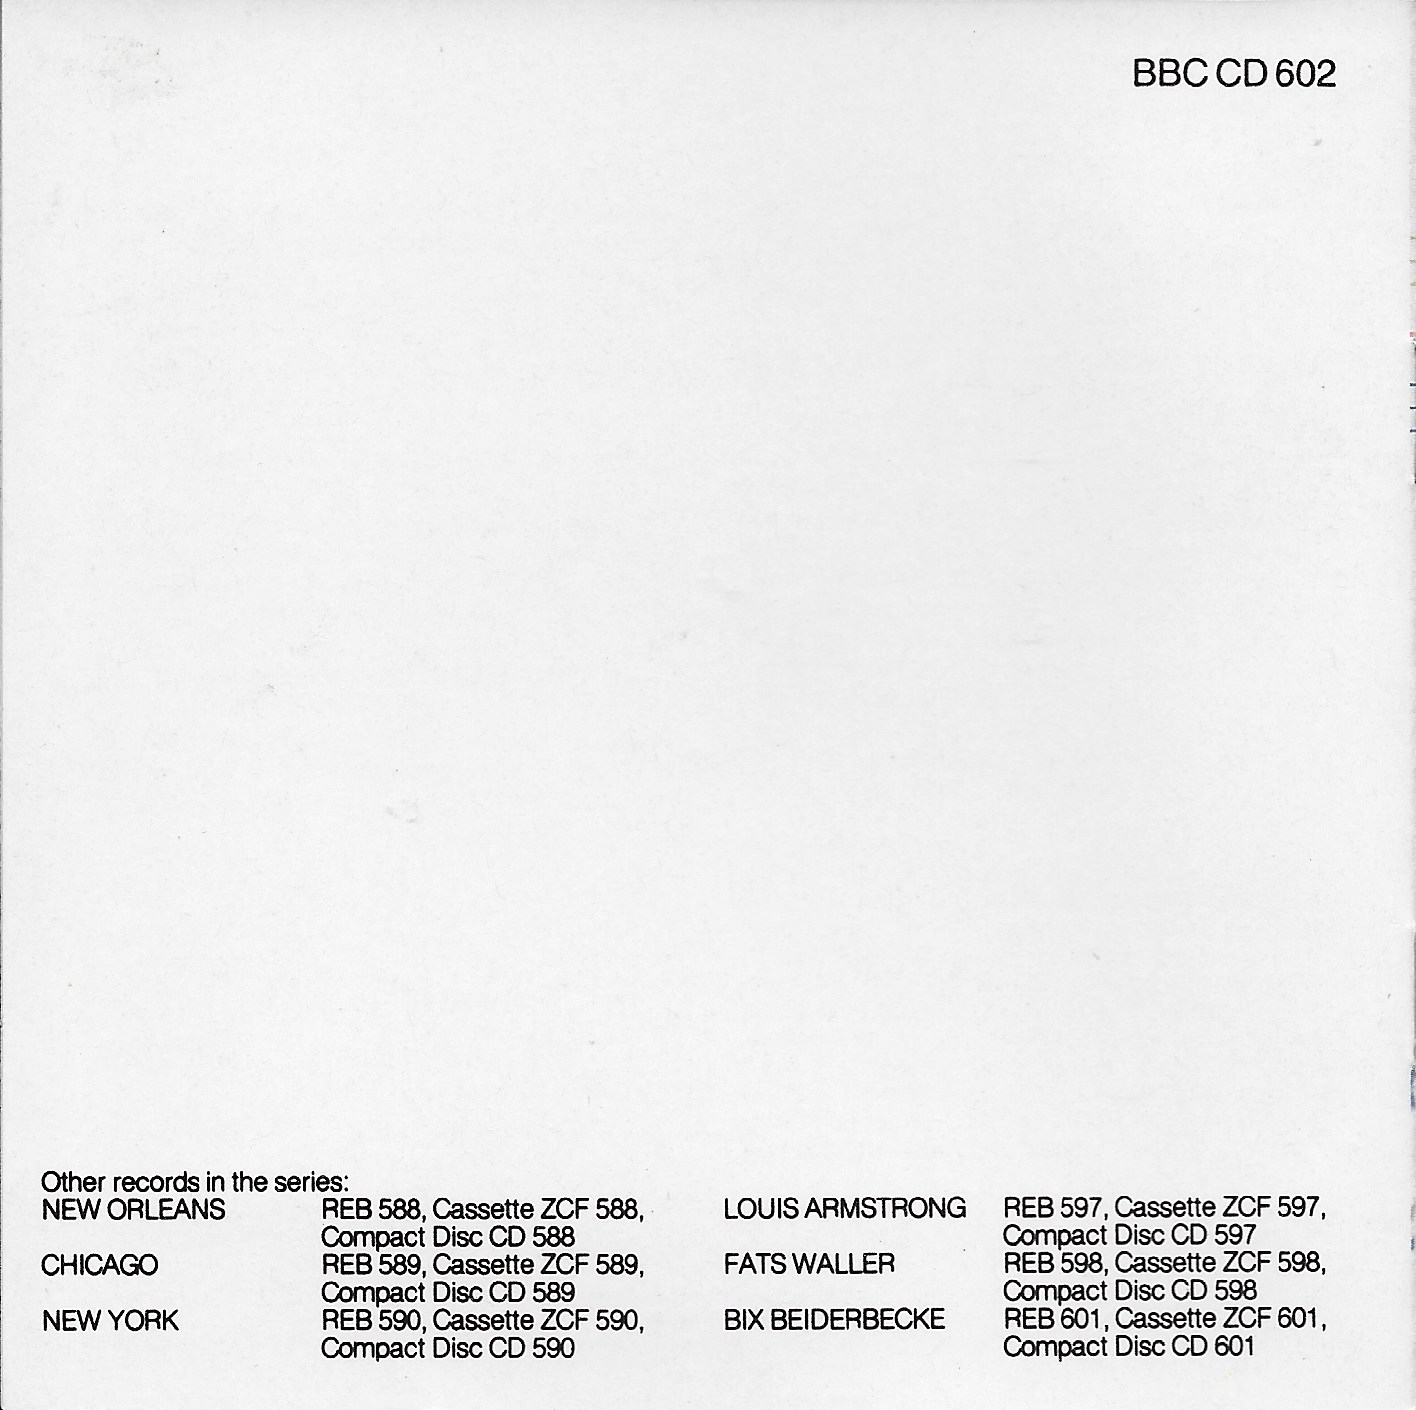 Middle of cover of BBCCD602